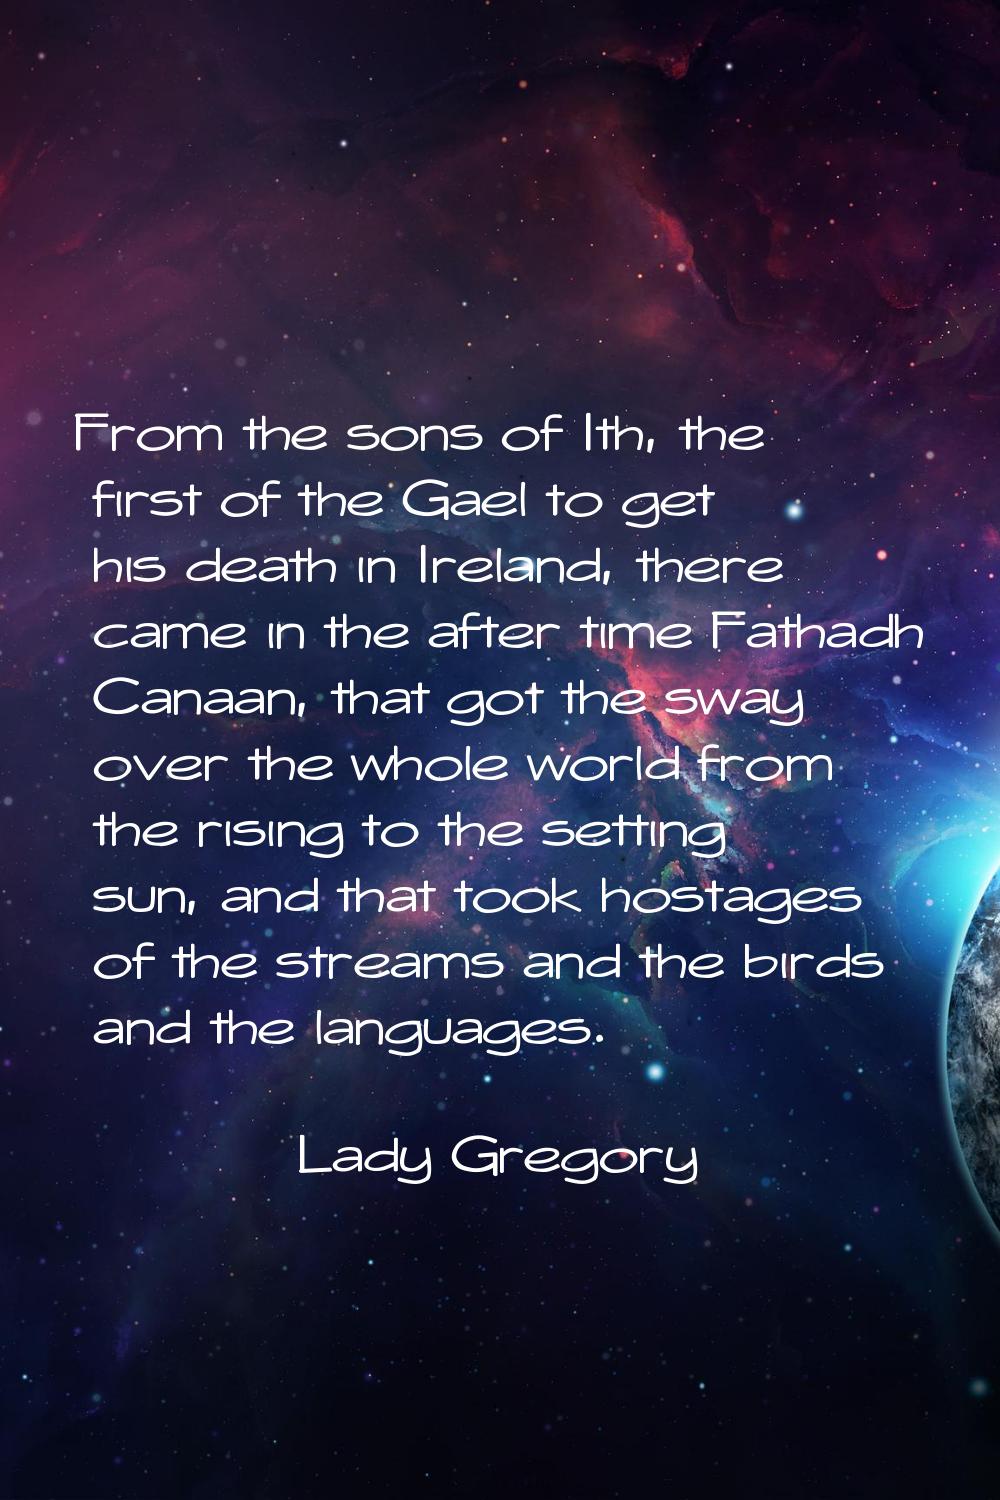 From the sons of Ith, the first of the Gael to get his death in Ireland, there came in the after ti